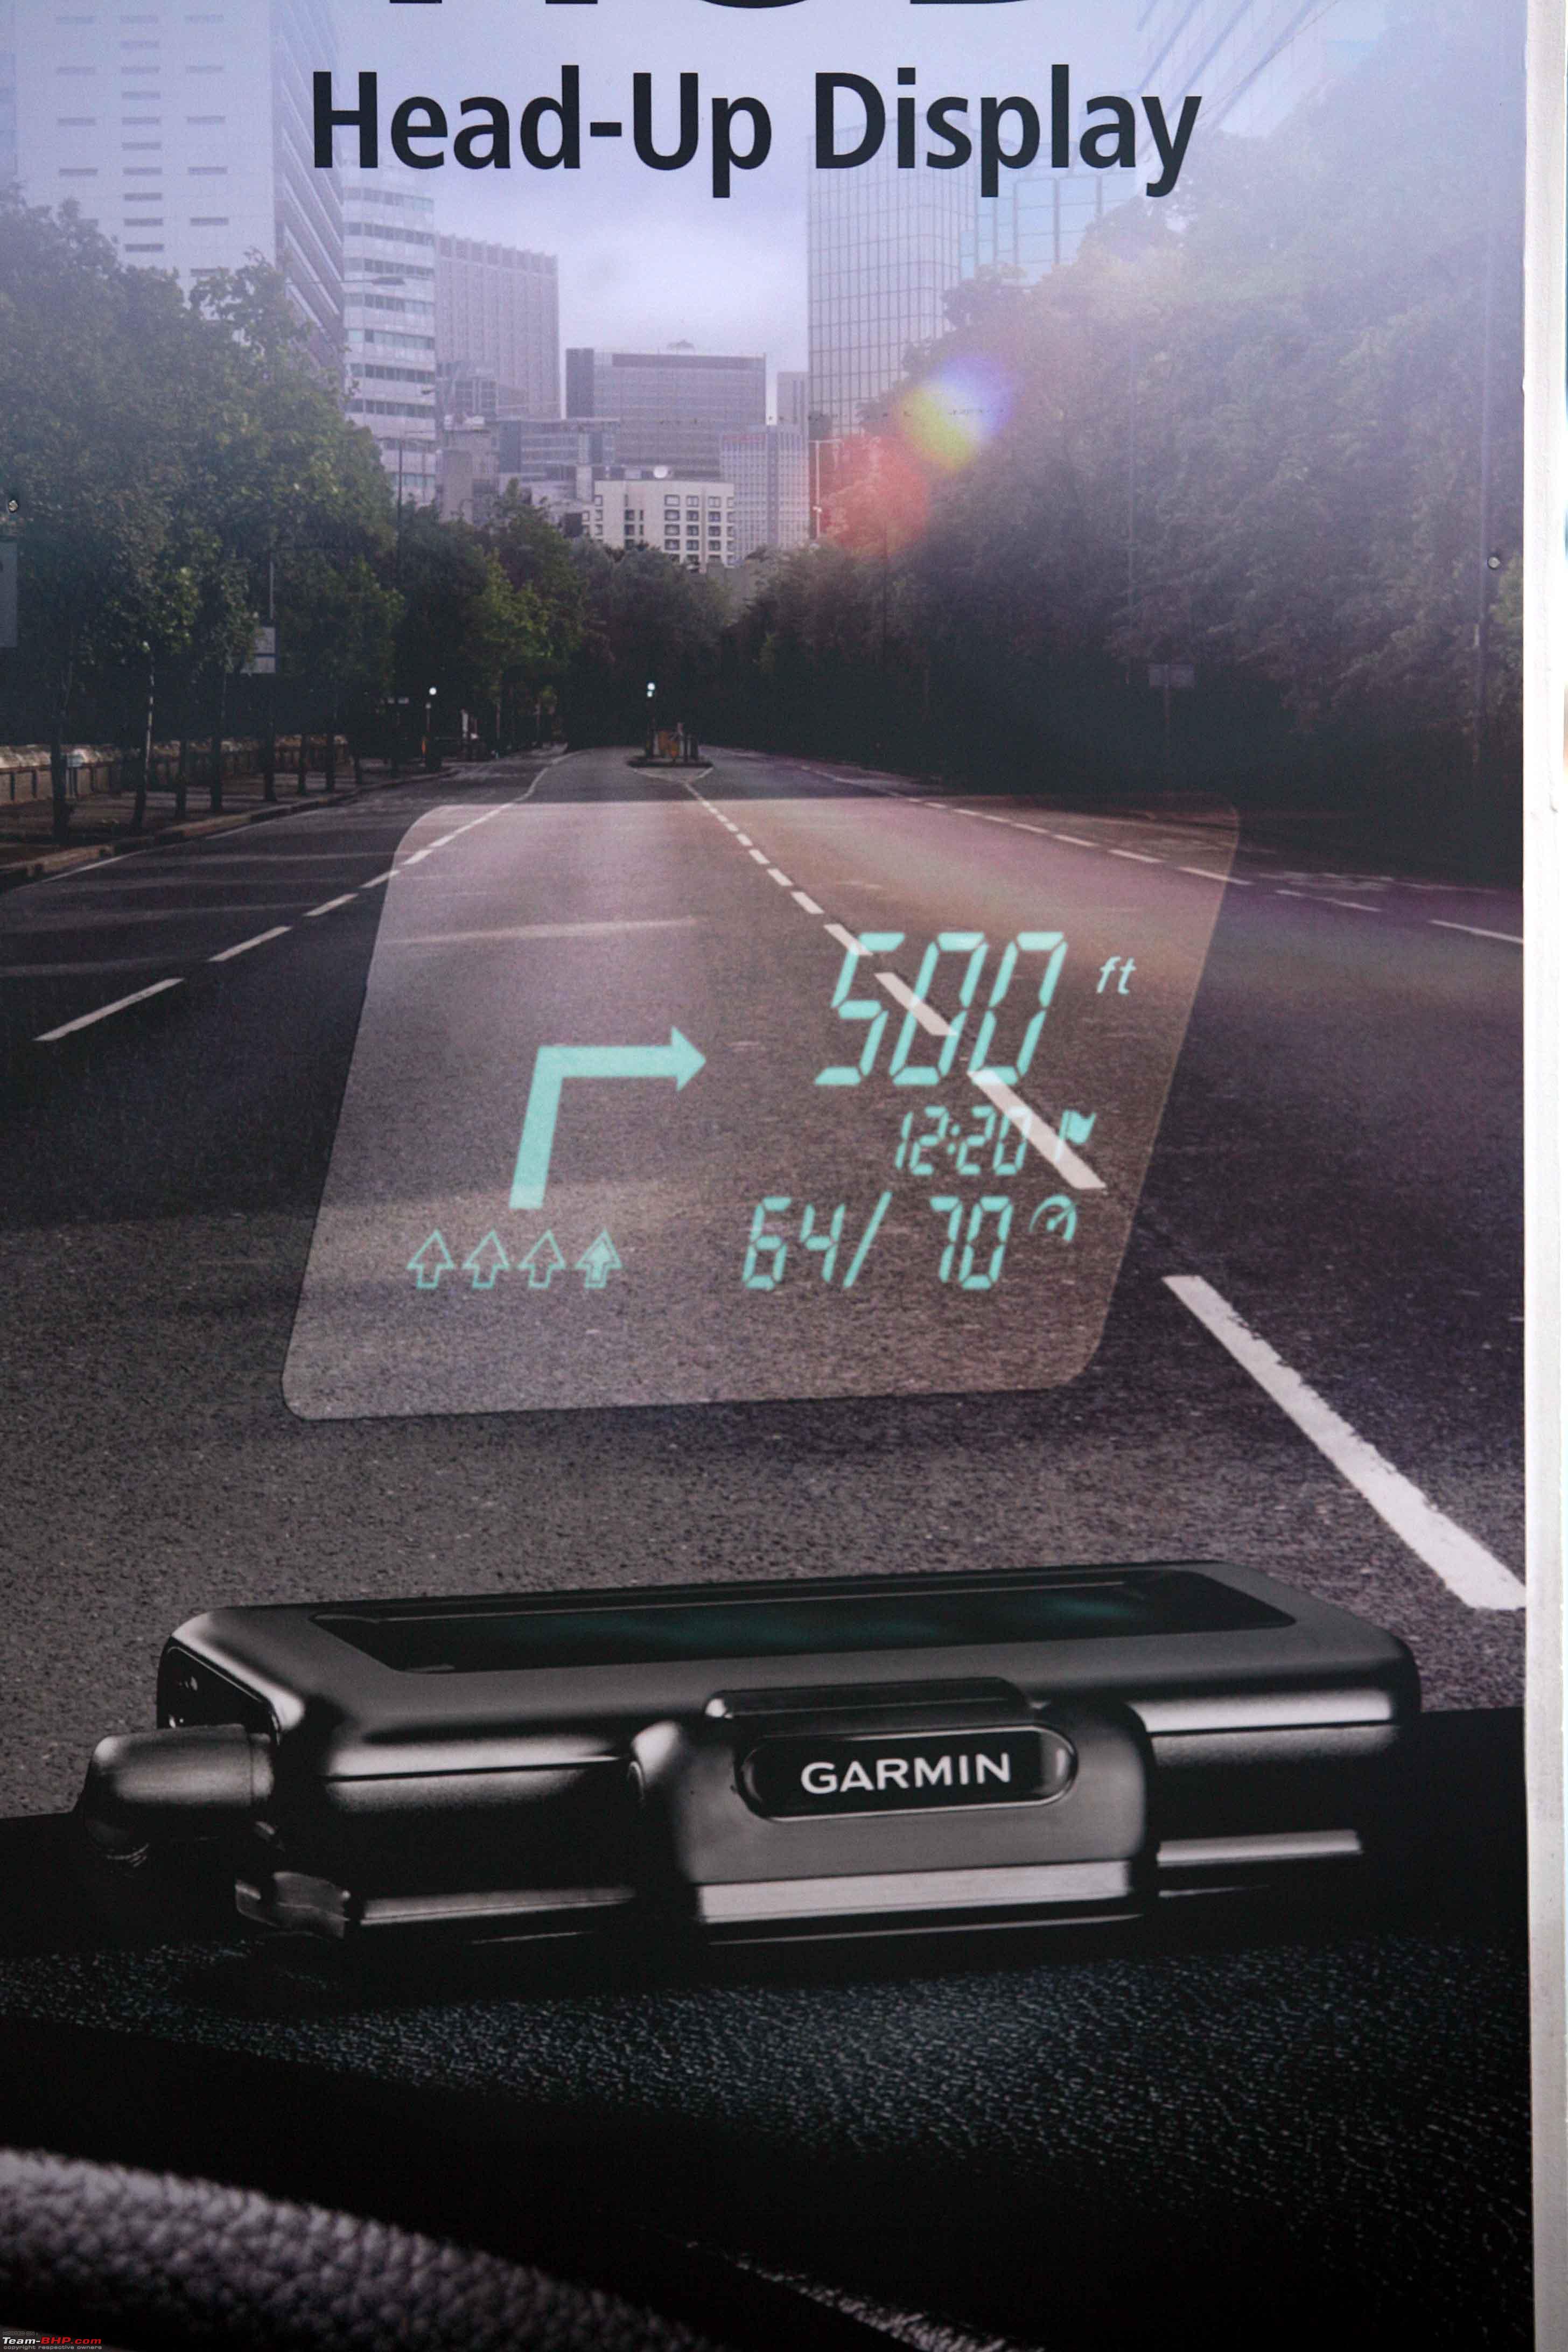 Garmin launches Head-Up Display for Rs. 15,000 - Team-BHP